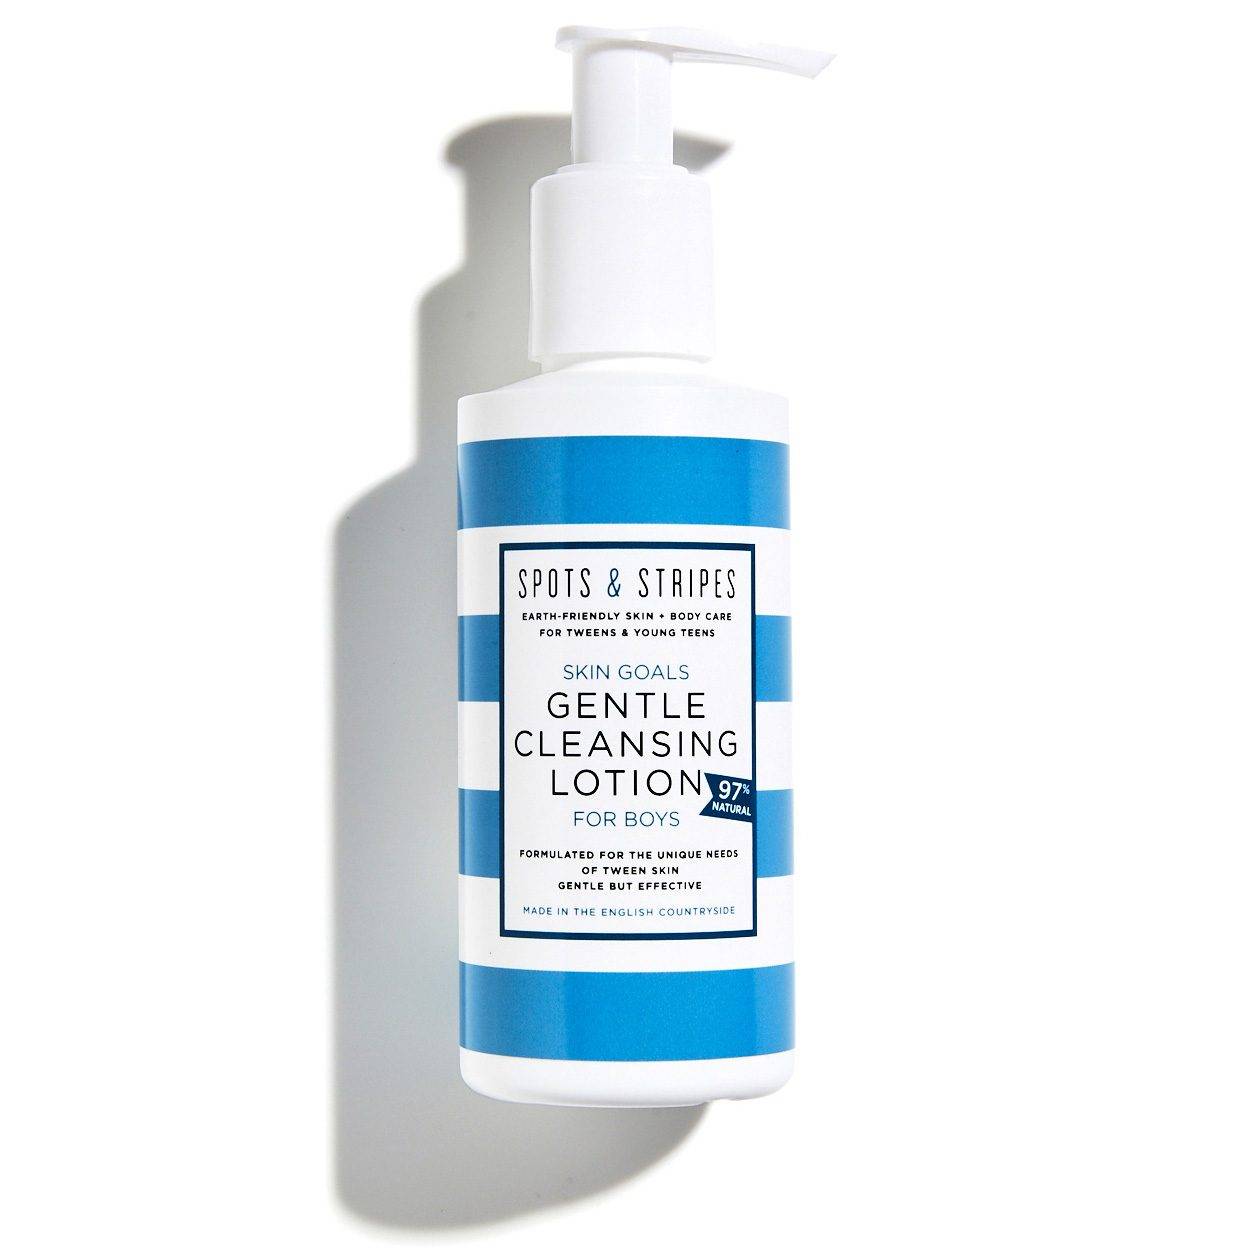 A gentle cleansing lotion specially for teen/teenage/tween boys, by earth-friendly skincare brand Spots & Stripes.